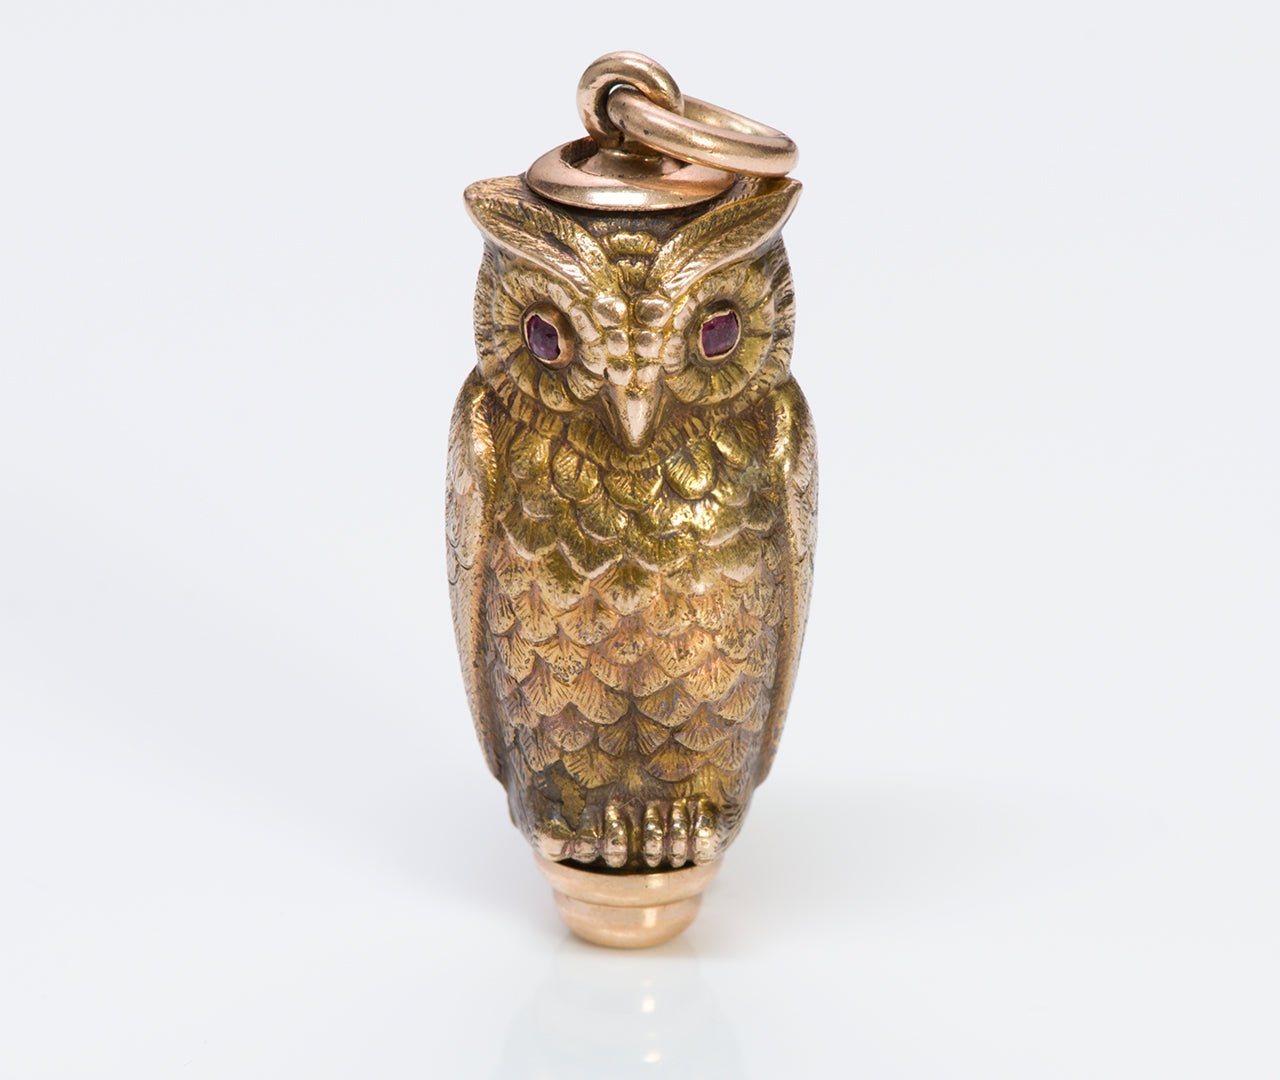 Antique Gold & Ruby Owl Fob Mechanical Pencil - DSF Antique Jewelry